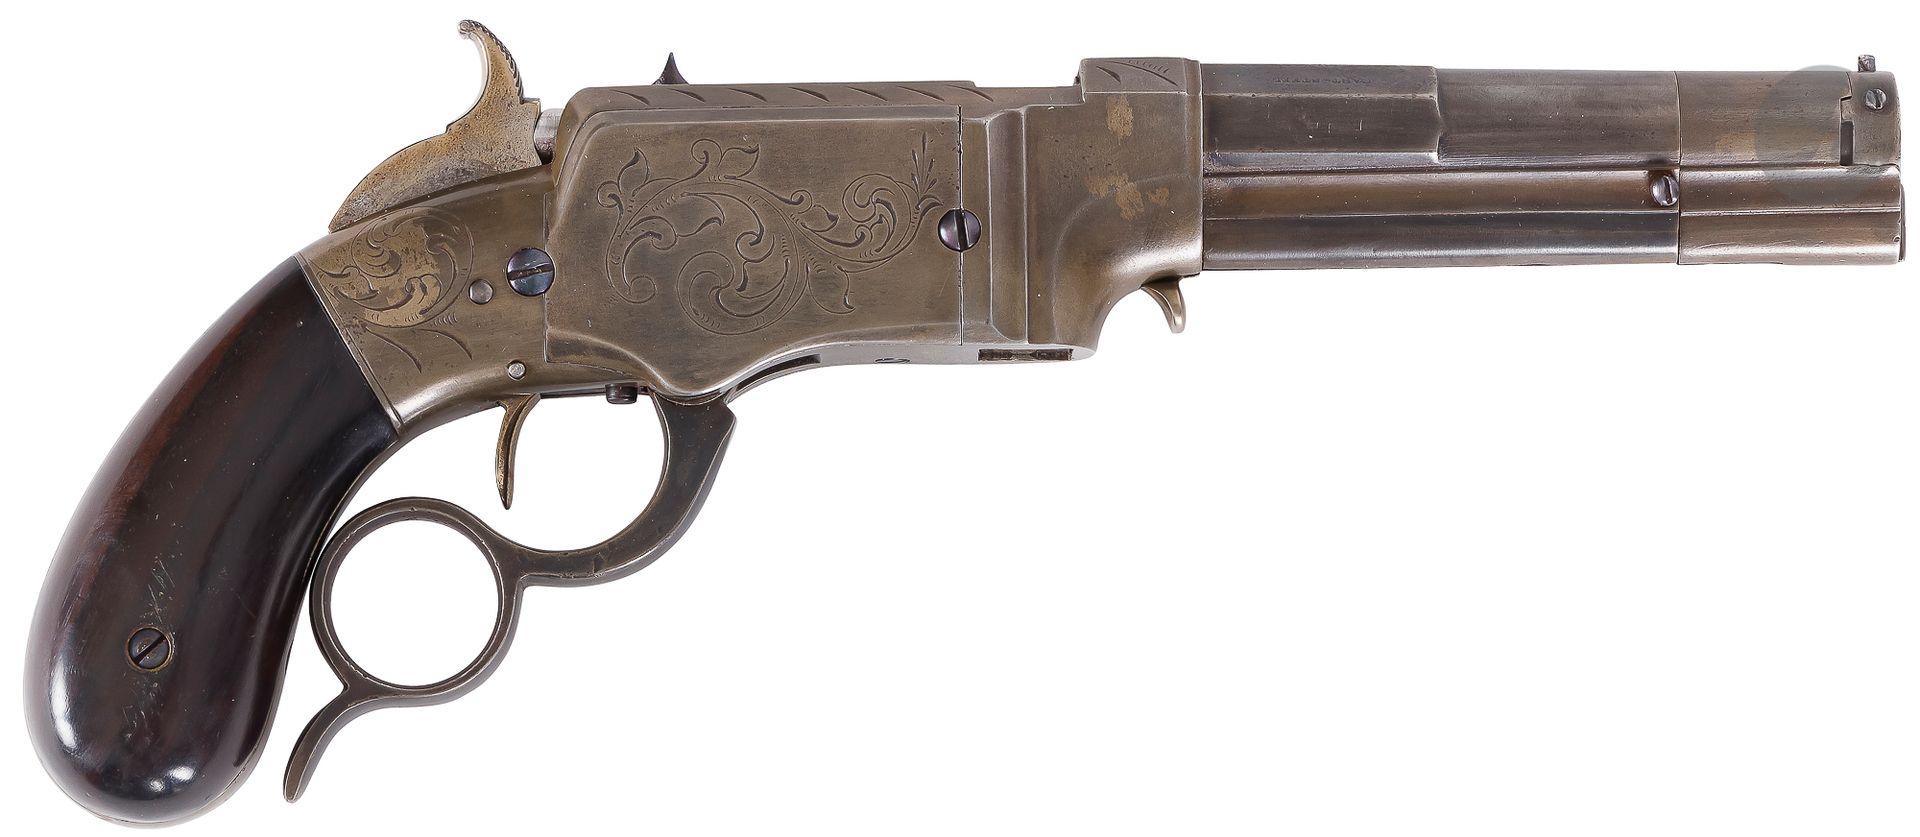 Null Pistolet « Lever action N° 1 » Smith & Wesson, calibre 31. 

Canon rond, ra&hellip;